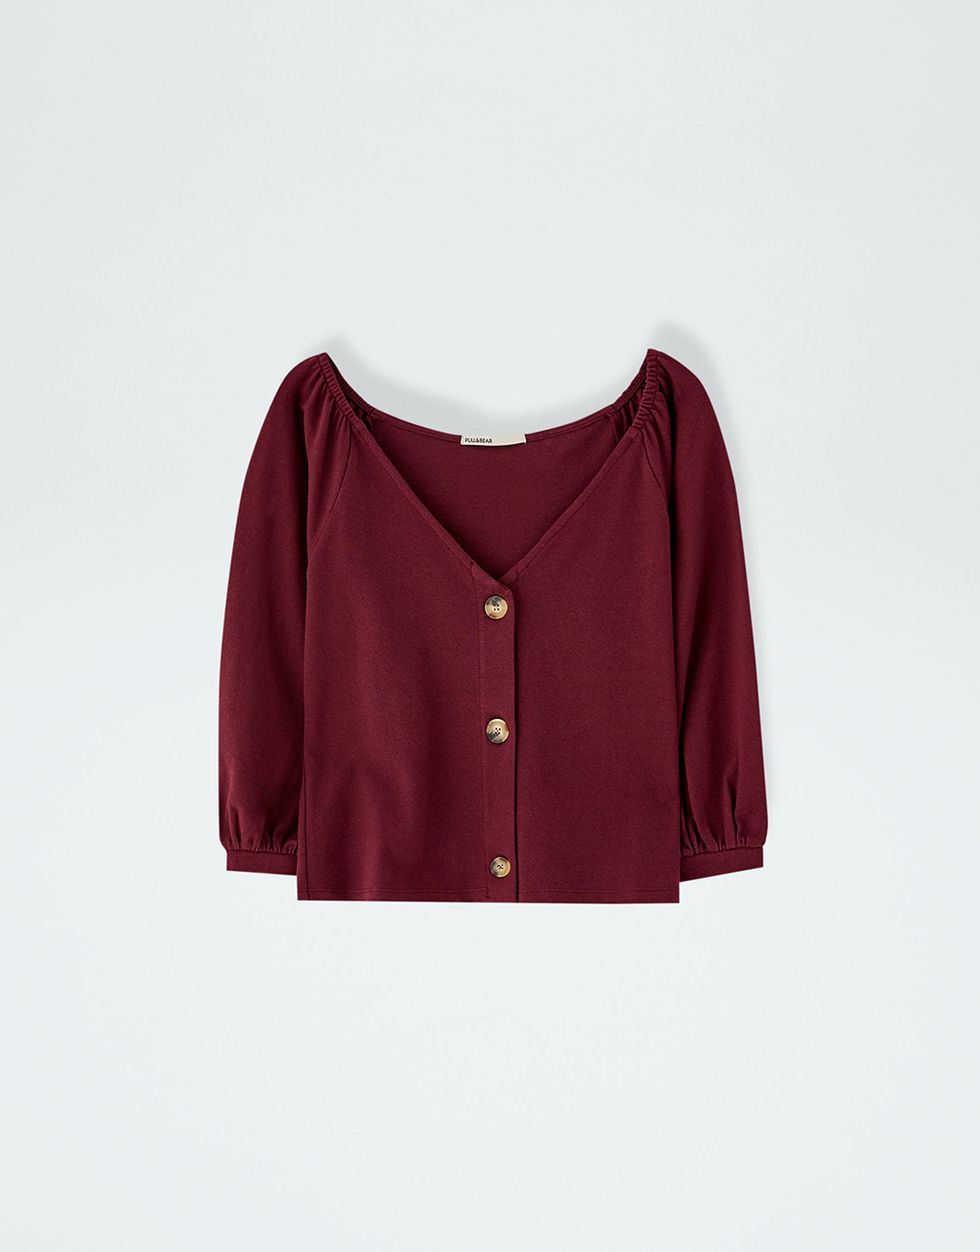 Clothing, Maroon, Outerwear, Sleeve, Red, Blouse, Magenta, Button, Collar, Neck, 